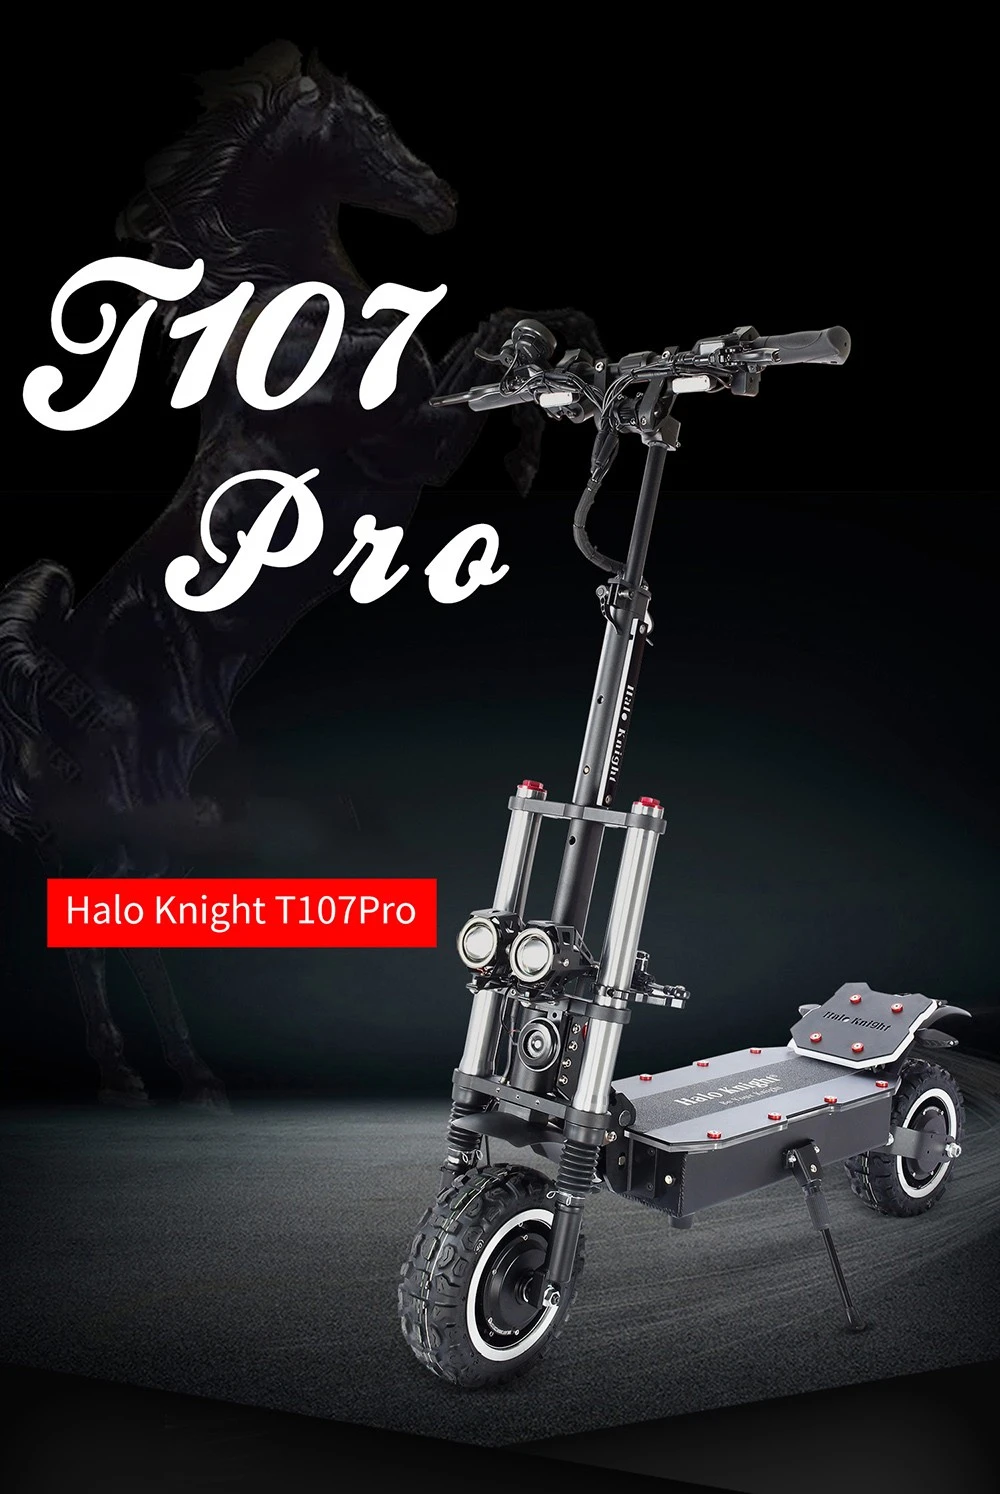 https://img.gkbcdn.com/d/202210/Halo-Knight-T107-Pro-Electric-Scooter-11---Off-road-Tire-517422-0._p1_.jpg